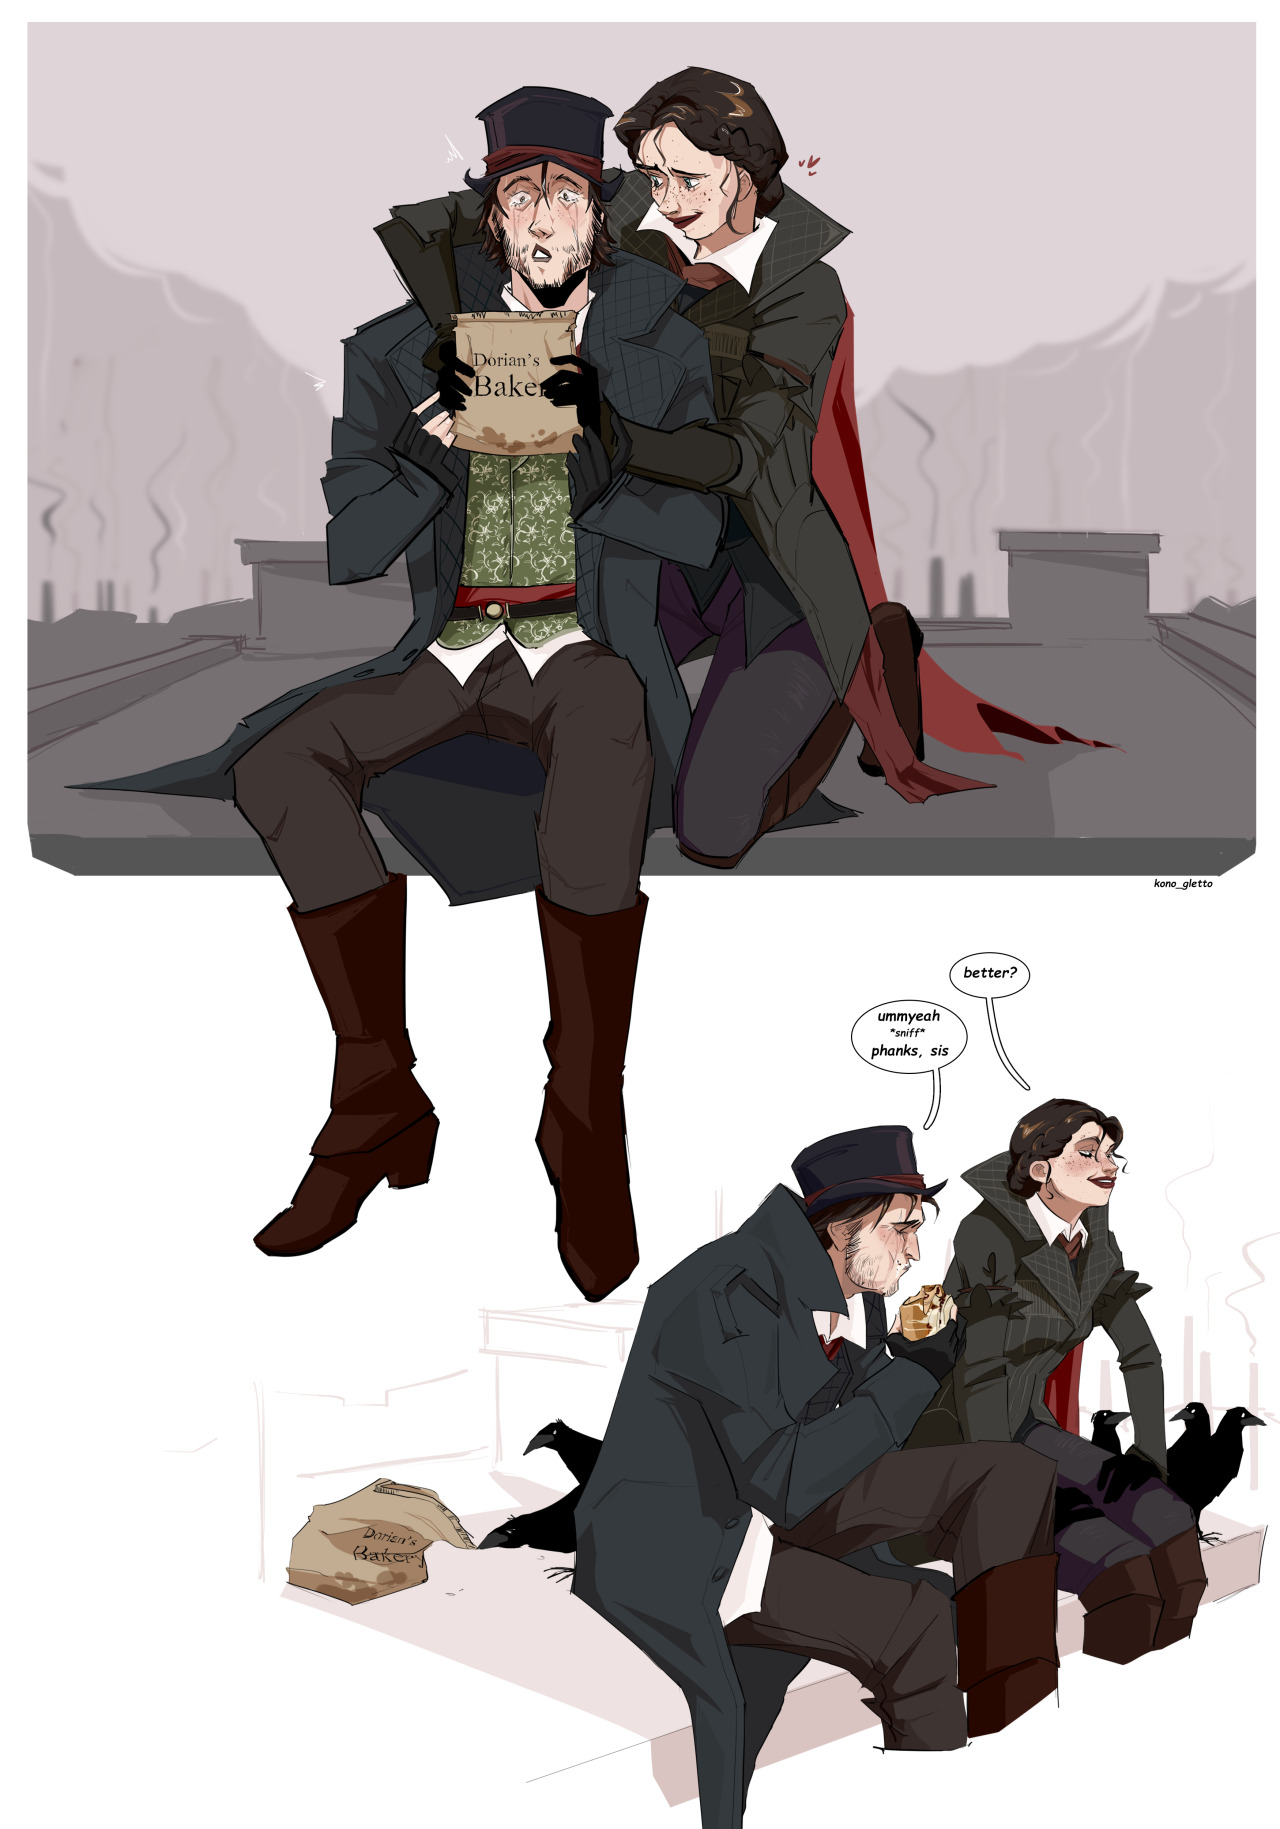 evie feeding her brother cause he it makes him feels better(it makes me feels better anyway) #Assassins Creed #Assassin’s Creed Syndicate #Frye twins#evie frye#jacob frye